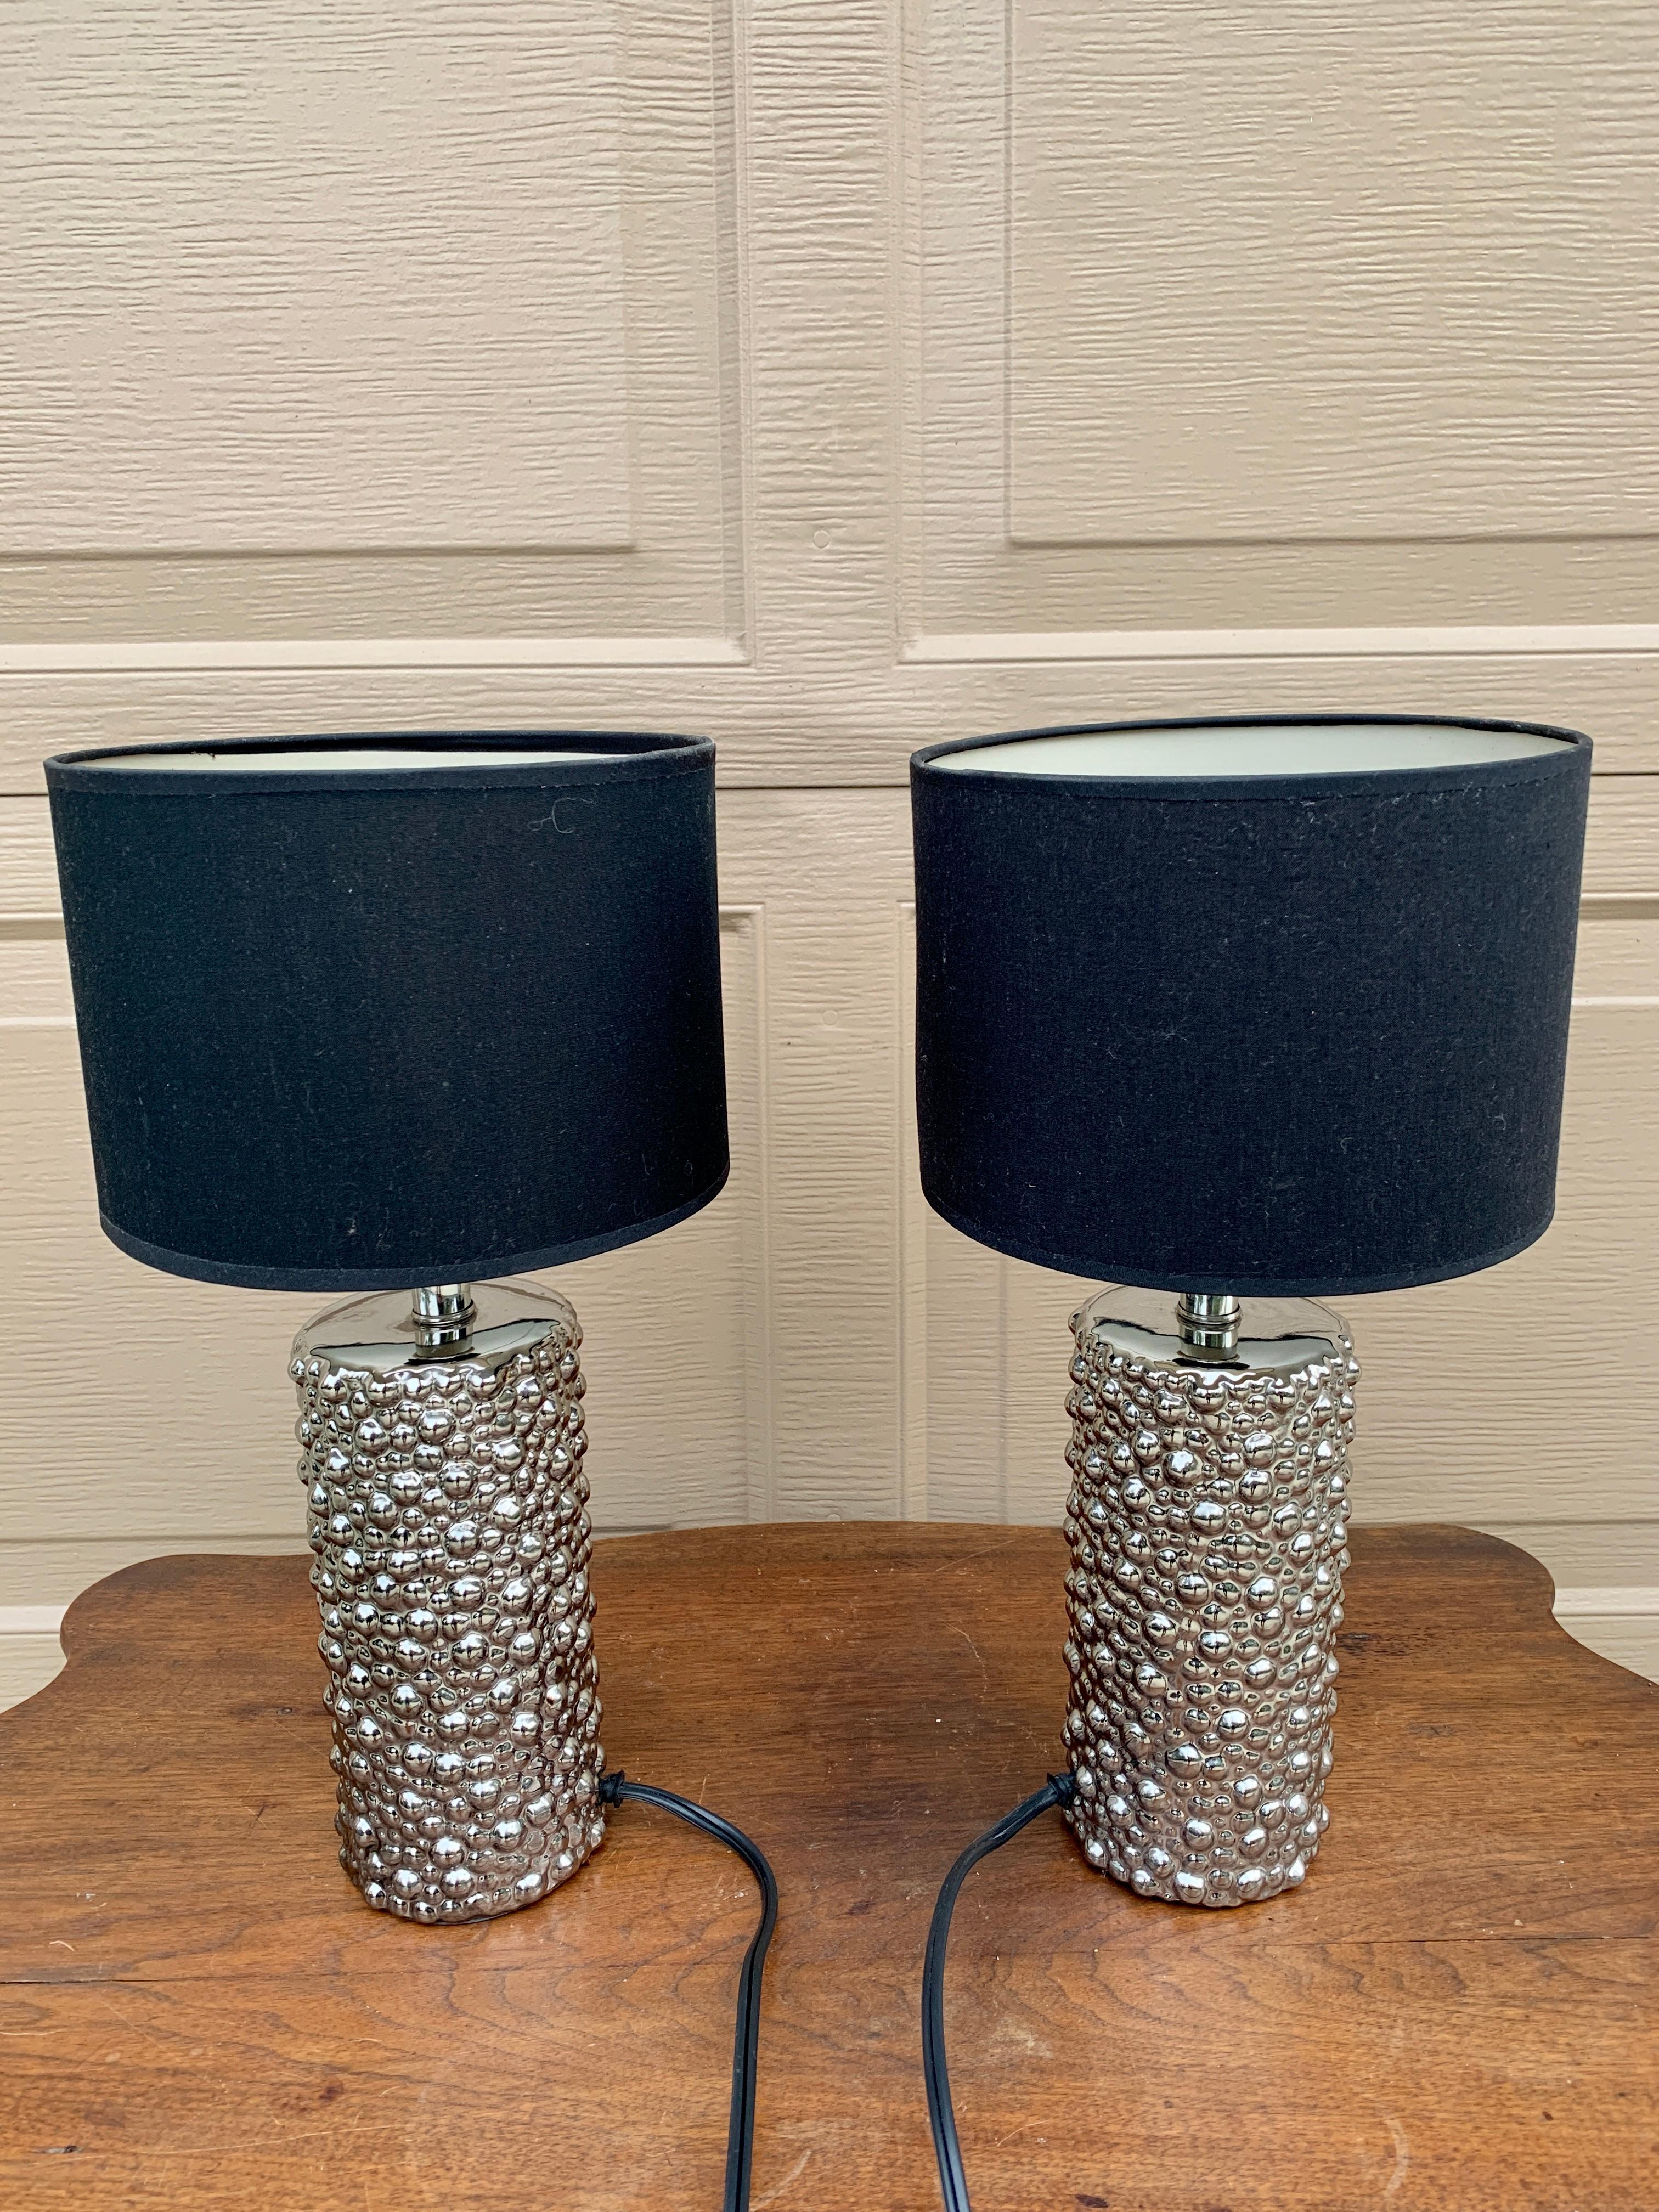 Contemporary Chrome Table Lamps with Black Drum Shades, Pair For Sale 1